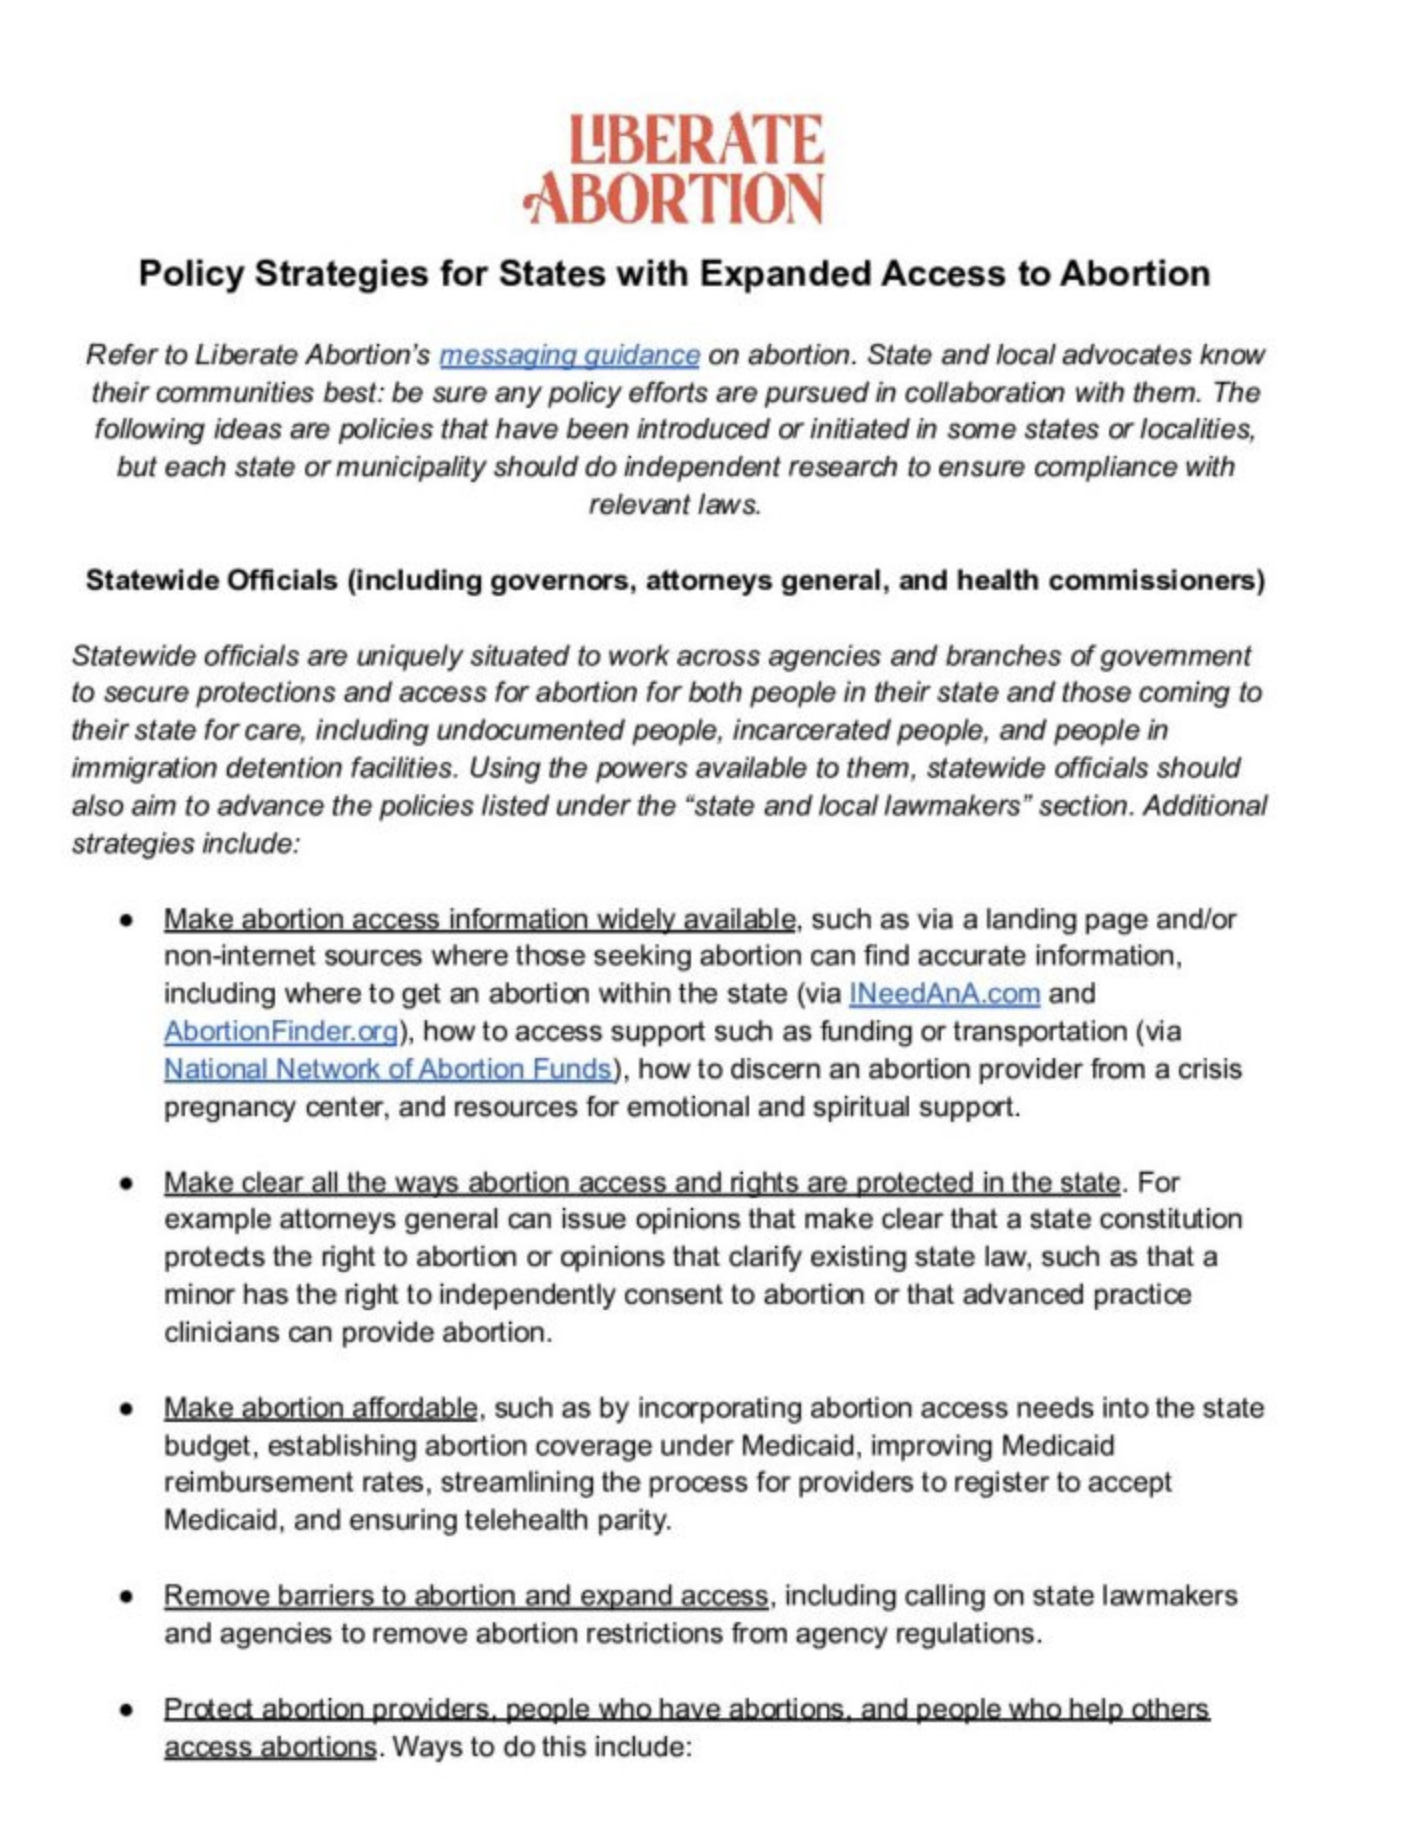 Screenshot of Liberate Abortion's Policy Strategies for States with Expanded Access to Abortion